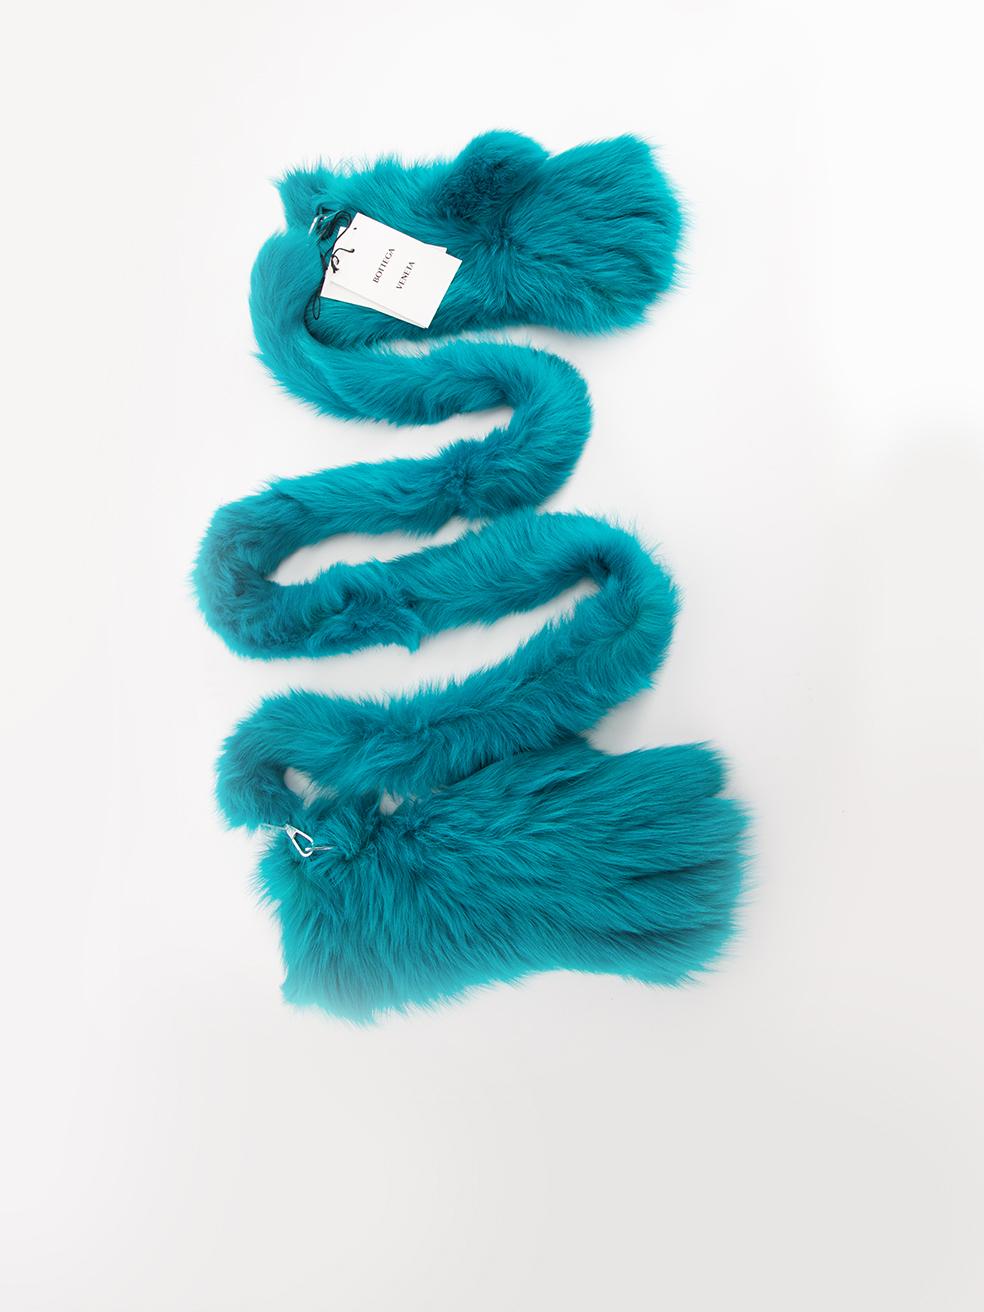 CONDITION is Never worn, with tags. No visible wear to gloves is evident on this new Bottega Veneta designer resale item. This item comes with original box.
 
 Details
  Teal
 Shearling fur
 Gloves
 Detachable straps
 
 
 Made in Italy
 
